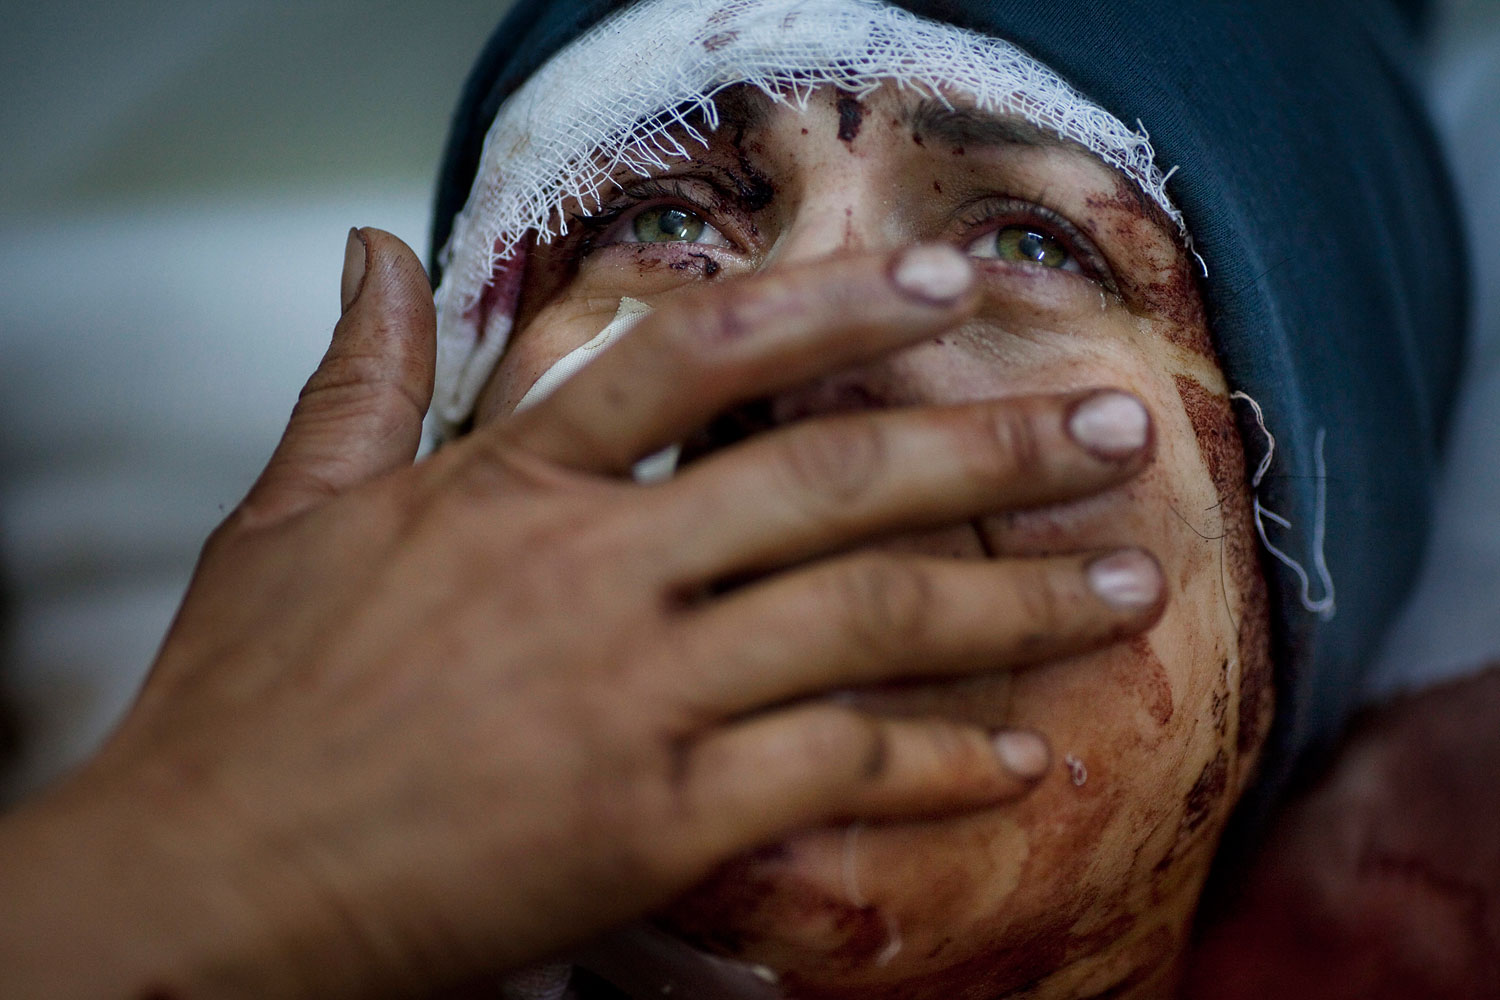 1st Prize General News Single. Rodrigo Abd, Argentina, The Associated Press. 10 March 2012, Idib, Syria. Aida cries while recovering from severe injuries she received when her house was shelled by the Syrian Army. Her husband and two children were fatally wounded during the shelling.